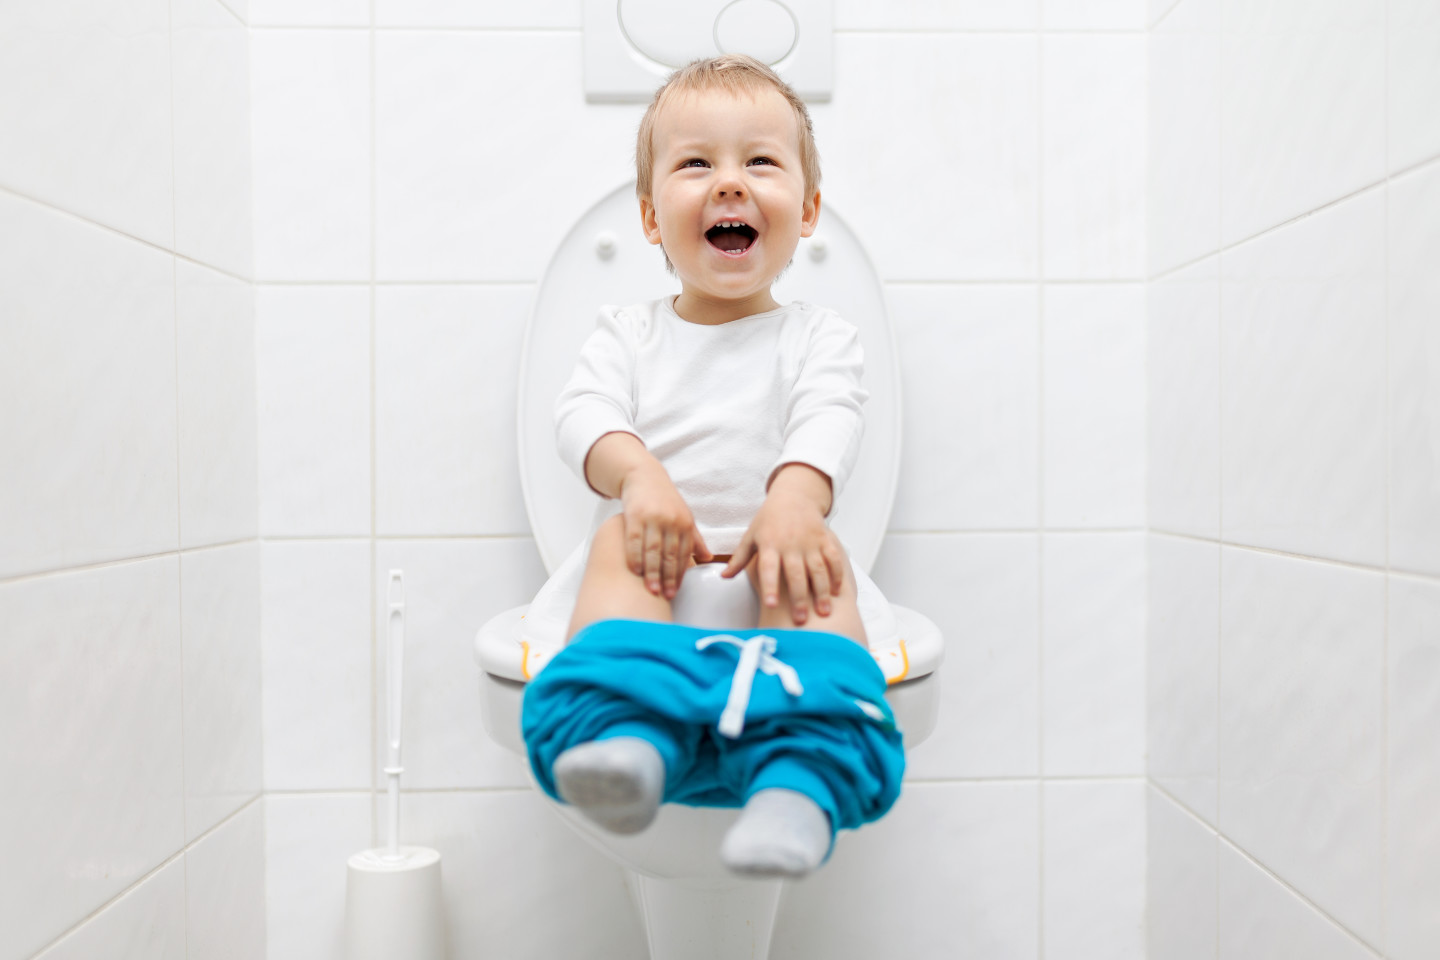 Finding the Right Time to Potty Train Your Child